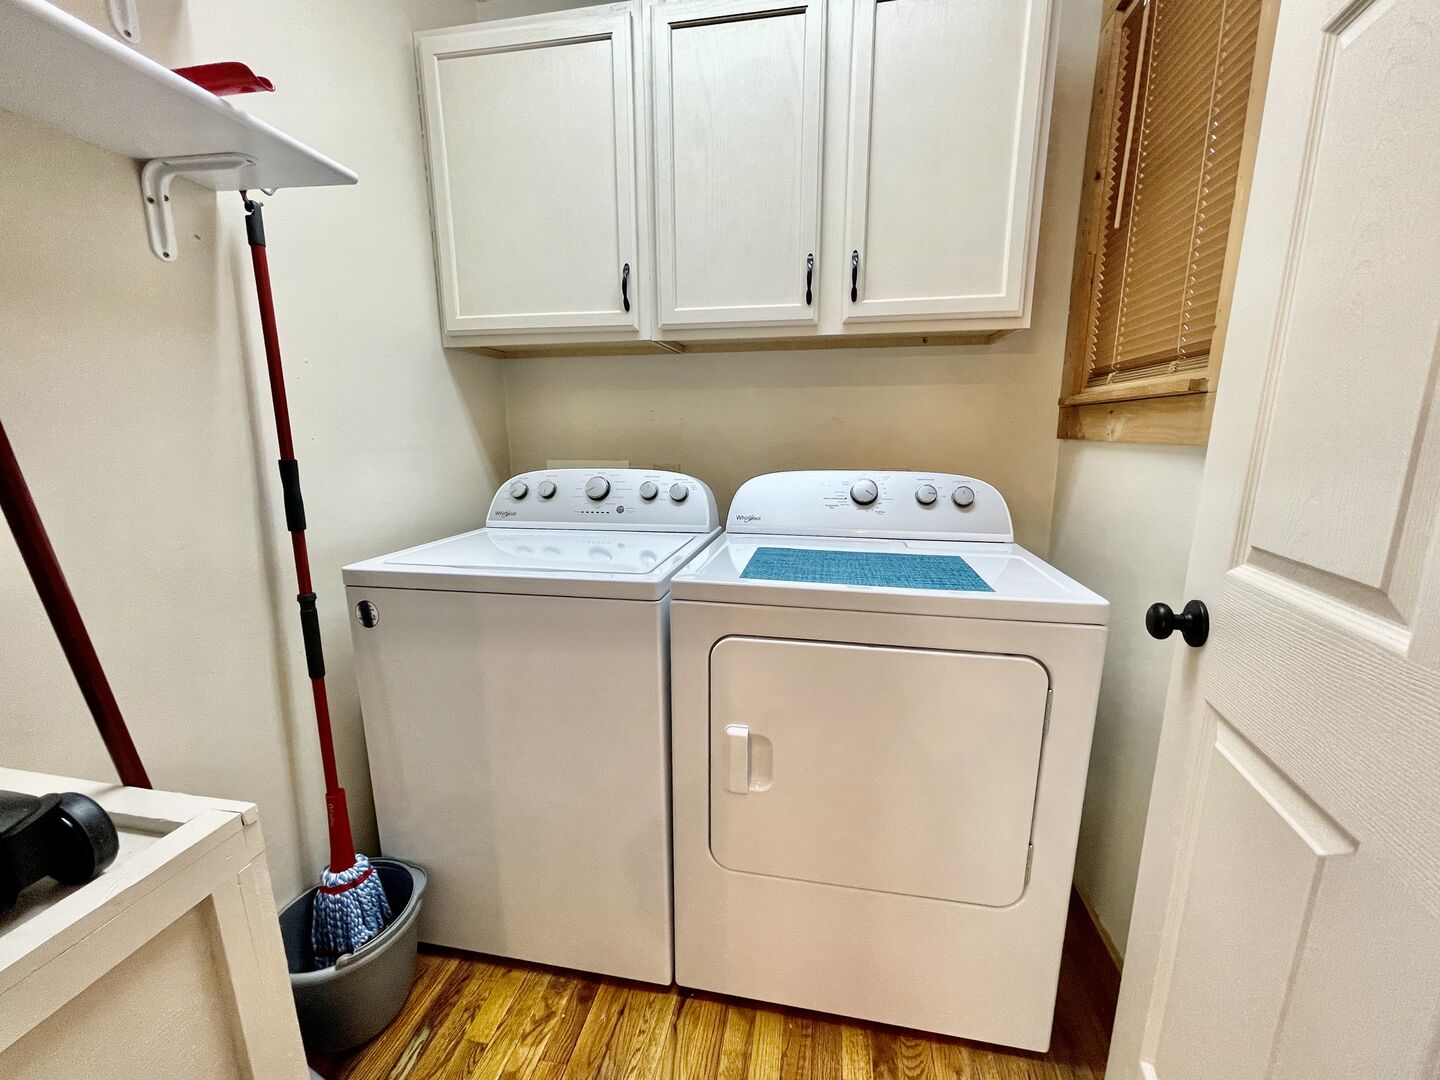 Full size washer & dryer in separate laundry room